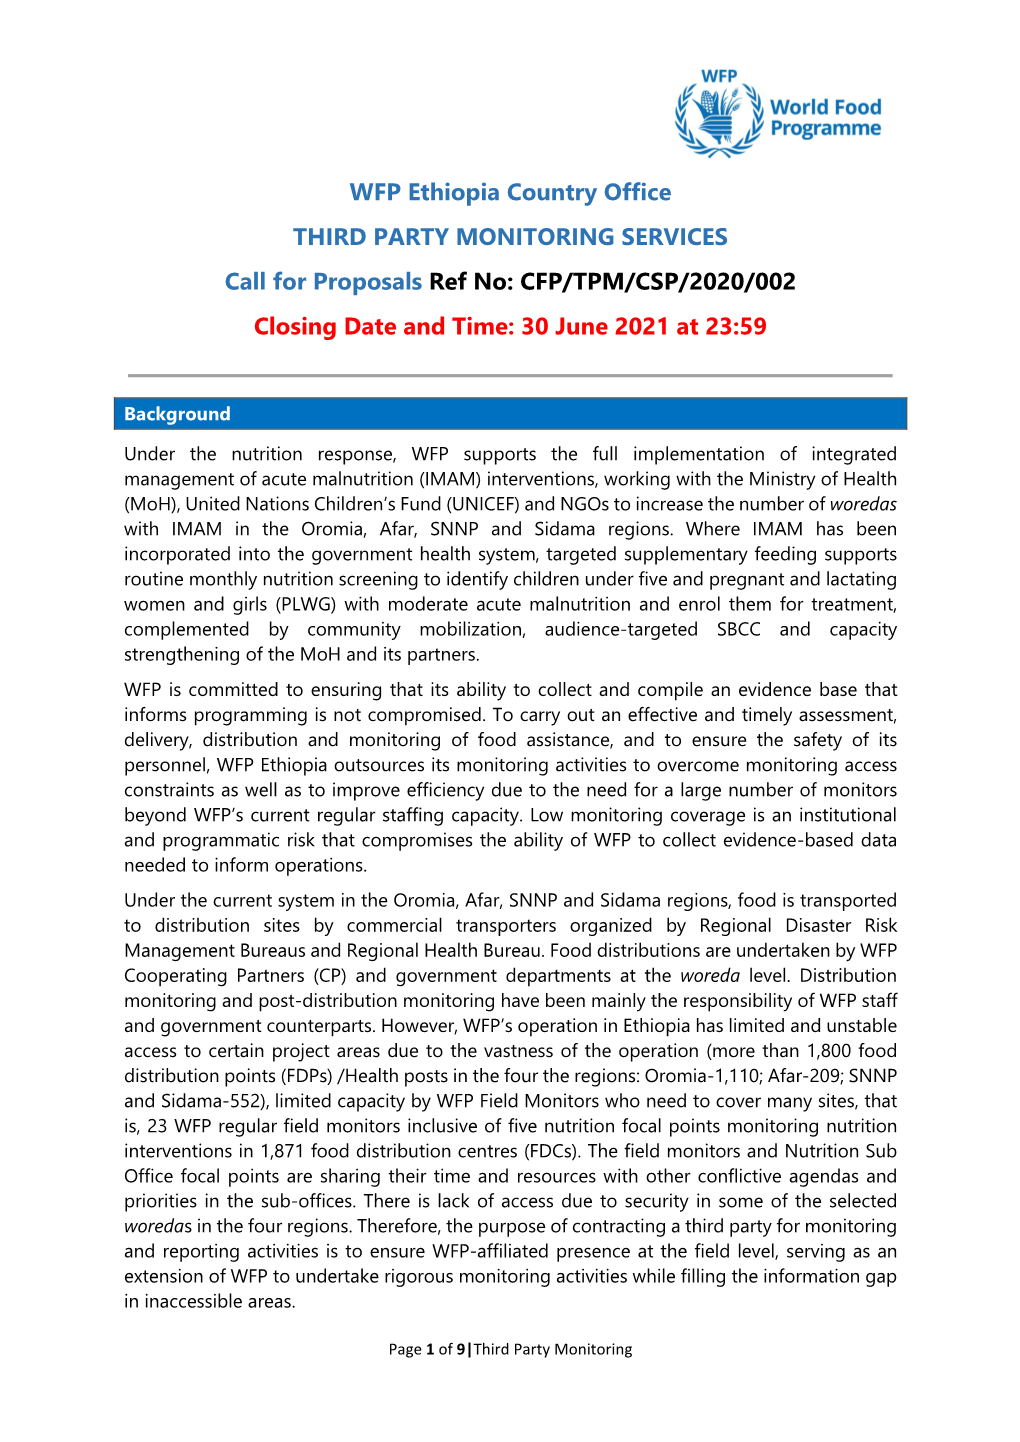 WFP Ethiopia Country Office THIRD PARTY MONITORING SERVICES Call for Proposals Ref No: CFP/TPM/CSP/2020/002 Closing Date and Time: 30 June 2021 at 23:59